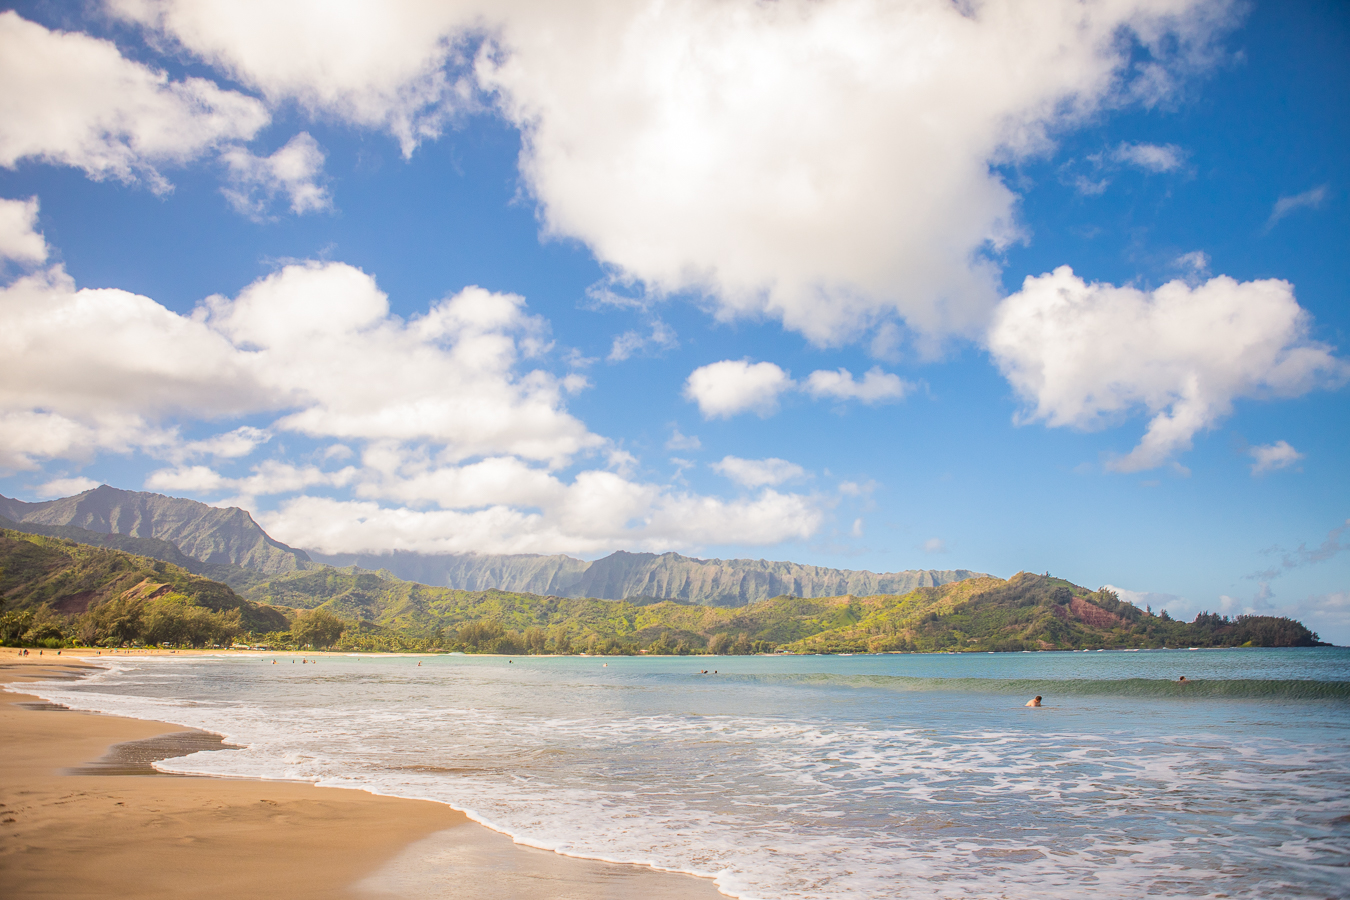 Read more about the article How we travelled to Maui and Kauai Hawaii on Credit Card Points